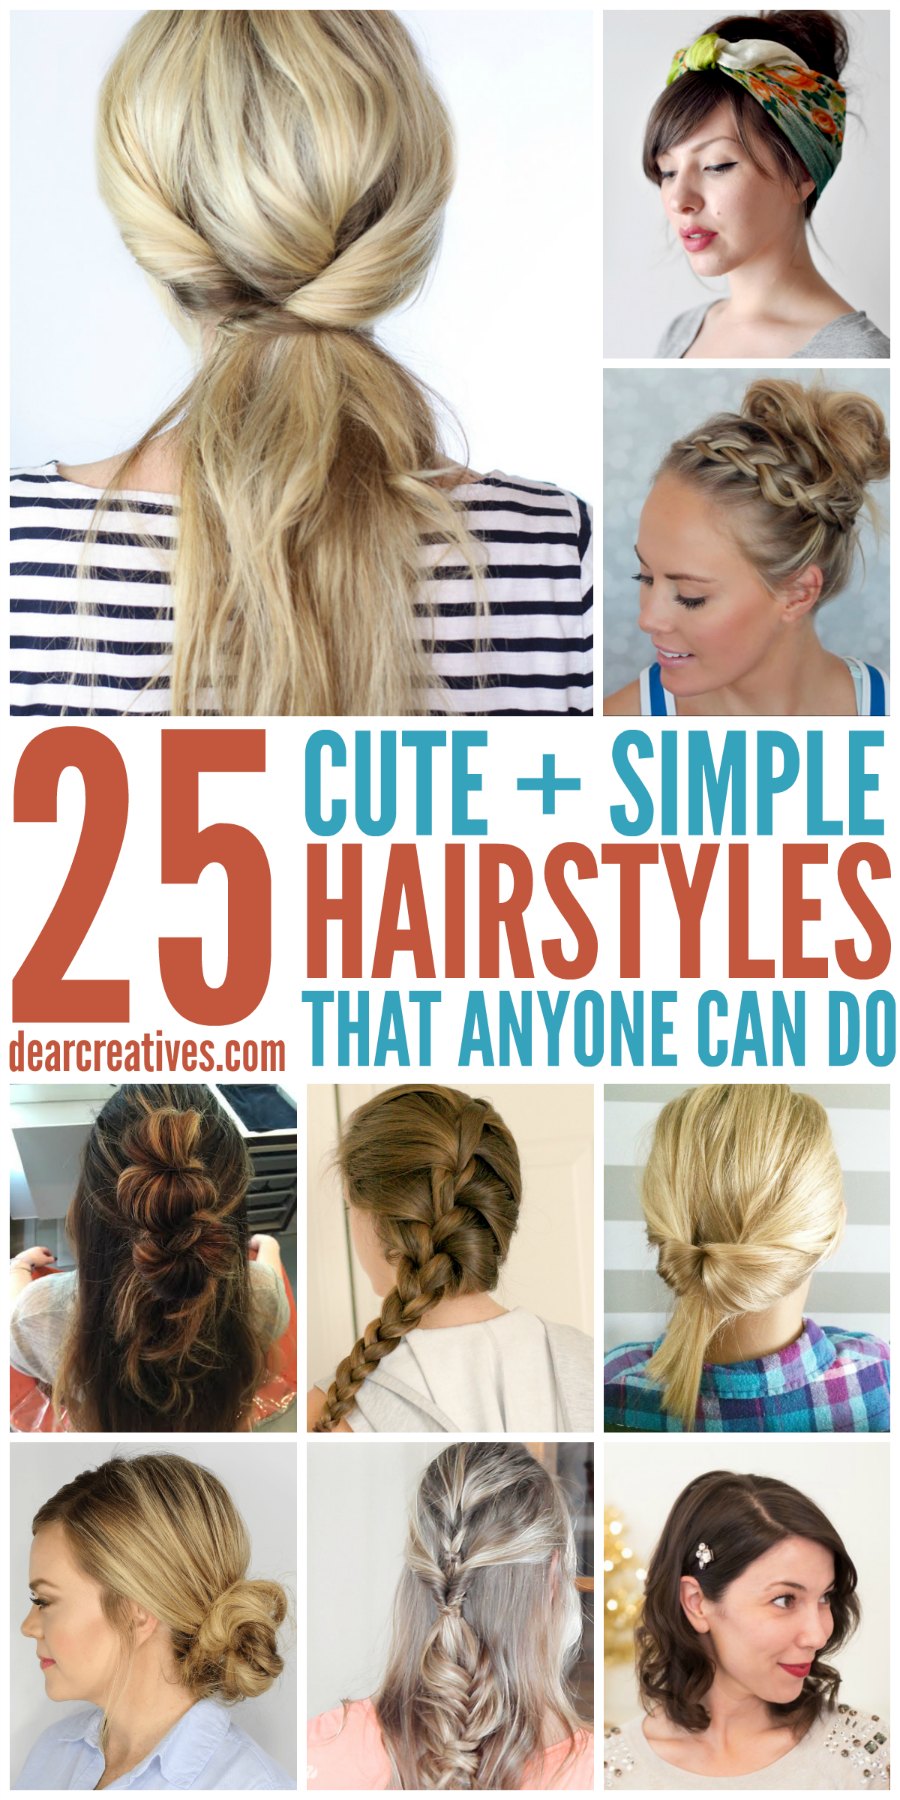 cute-hairstyles-to-do-with-long-hair-64_2 Cute hairstyles to do with long hair